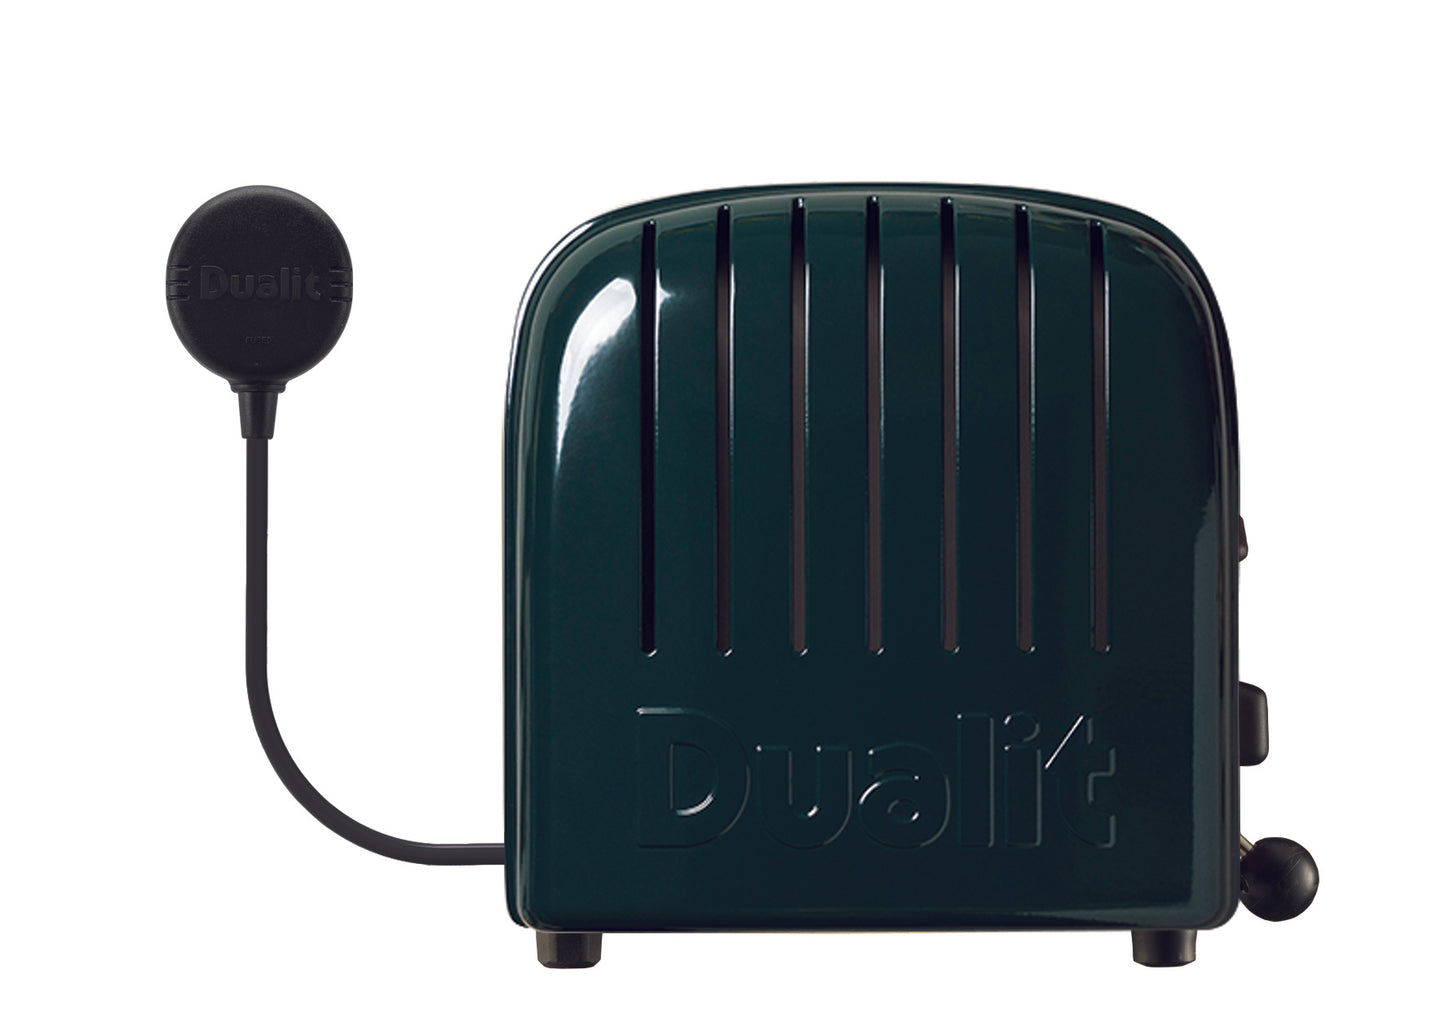 Dualit Toaster Classic 2 EVERGREEN